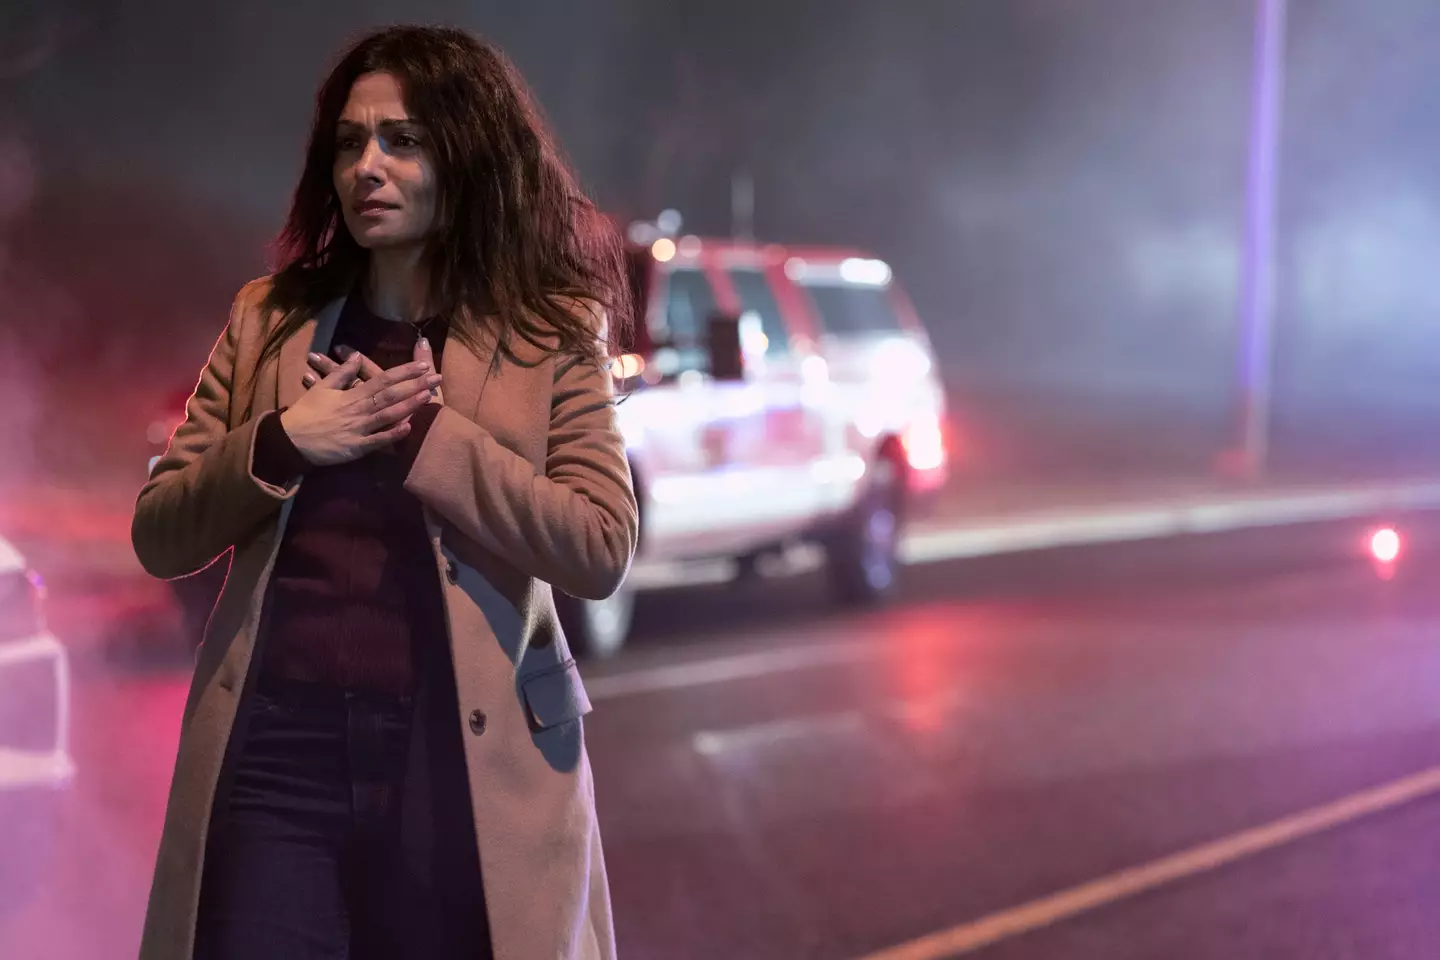 Sarah Shahi wasn't totally happy with how season two unfolded.